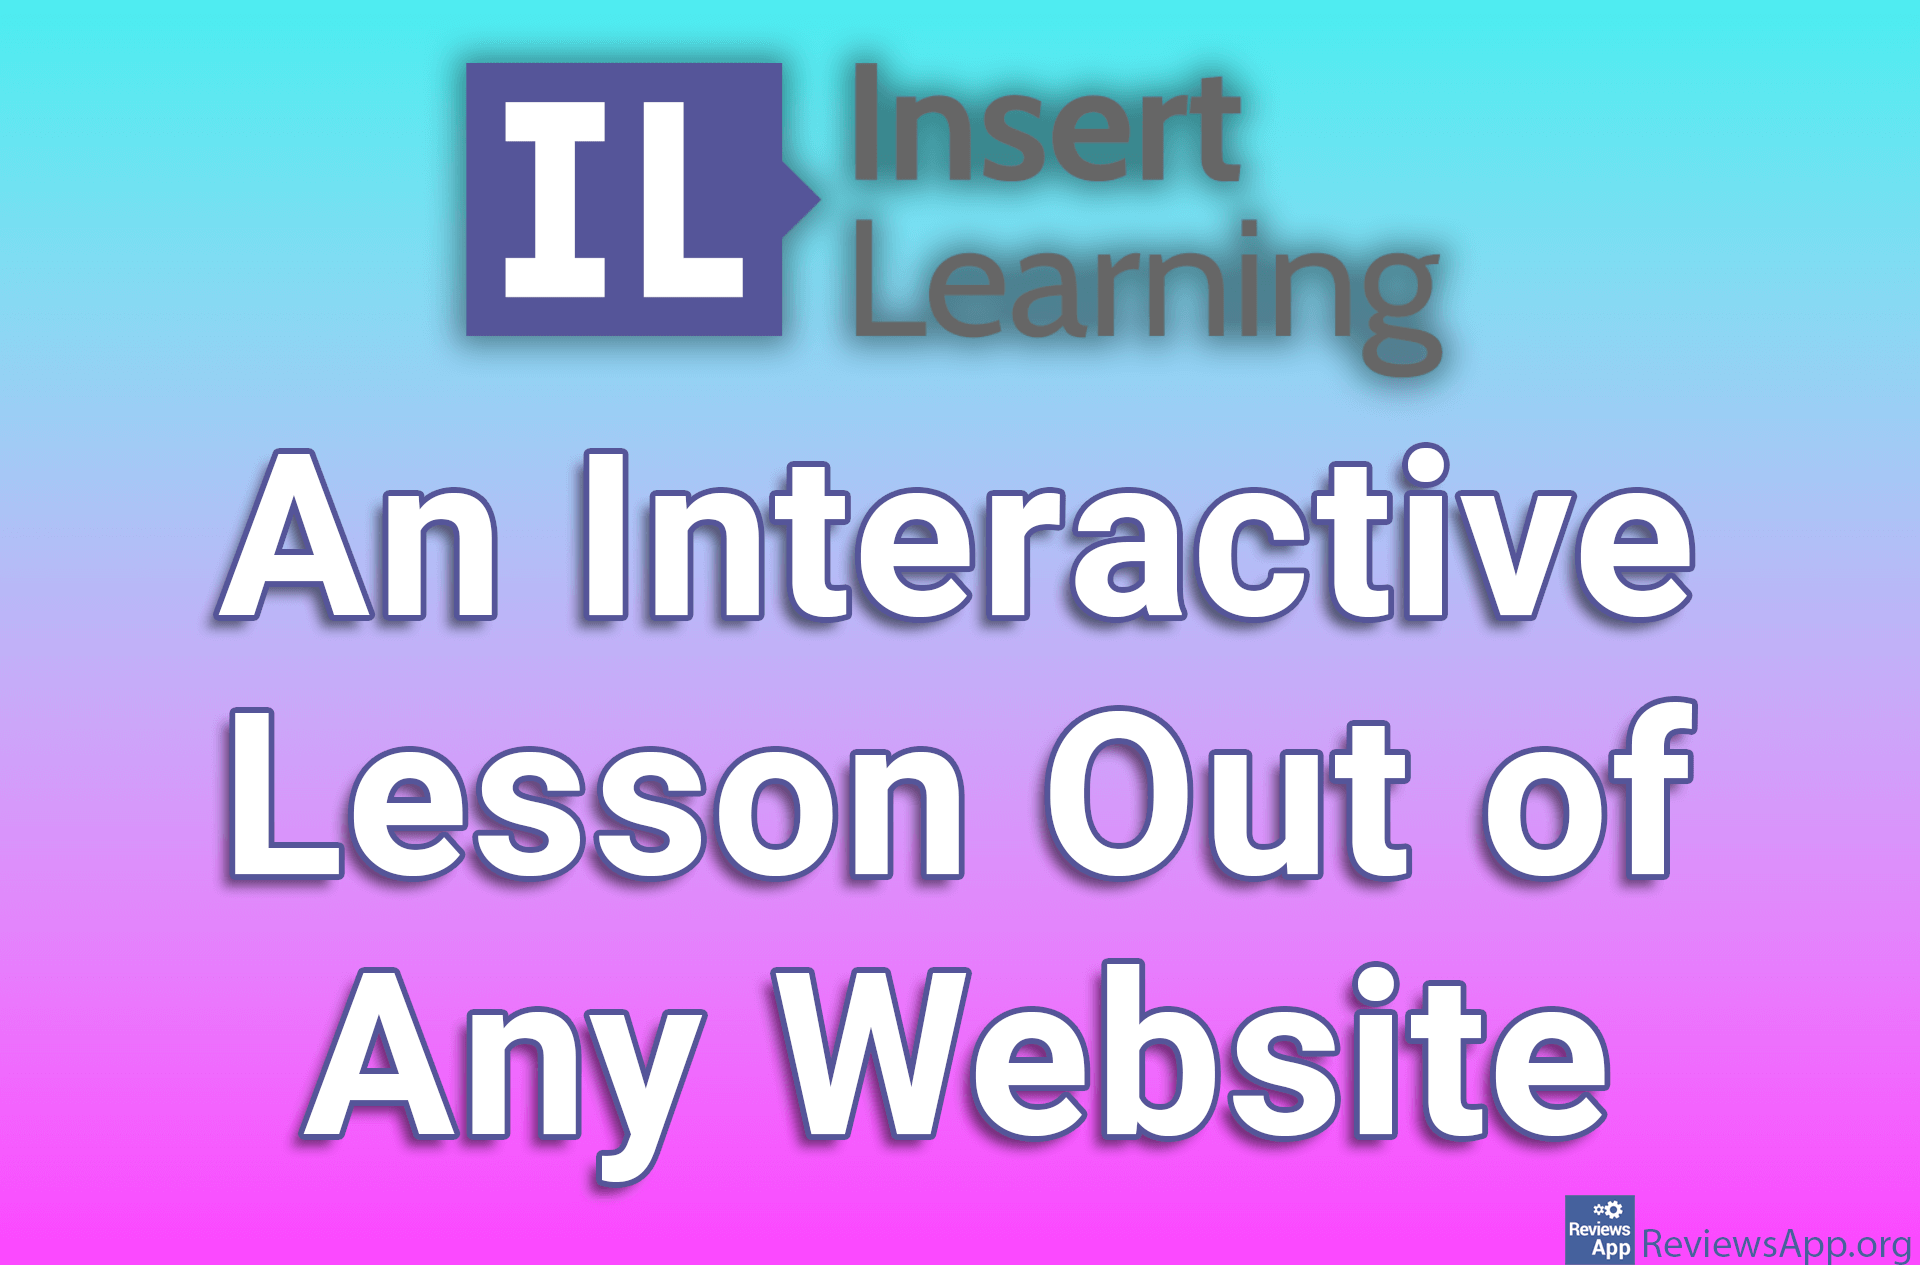 InsertLearning – An Interactive Lesson Out of Any Website